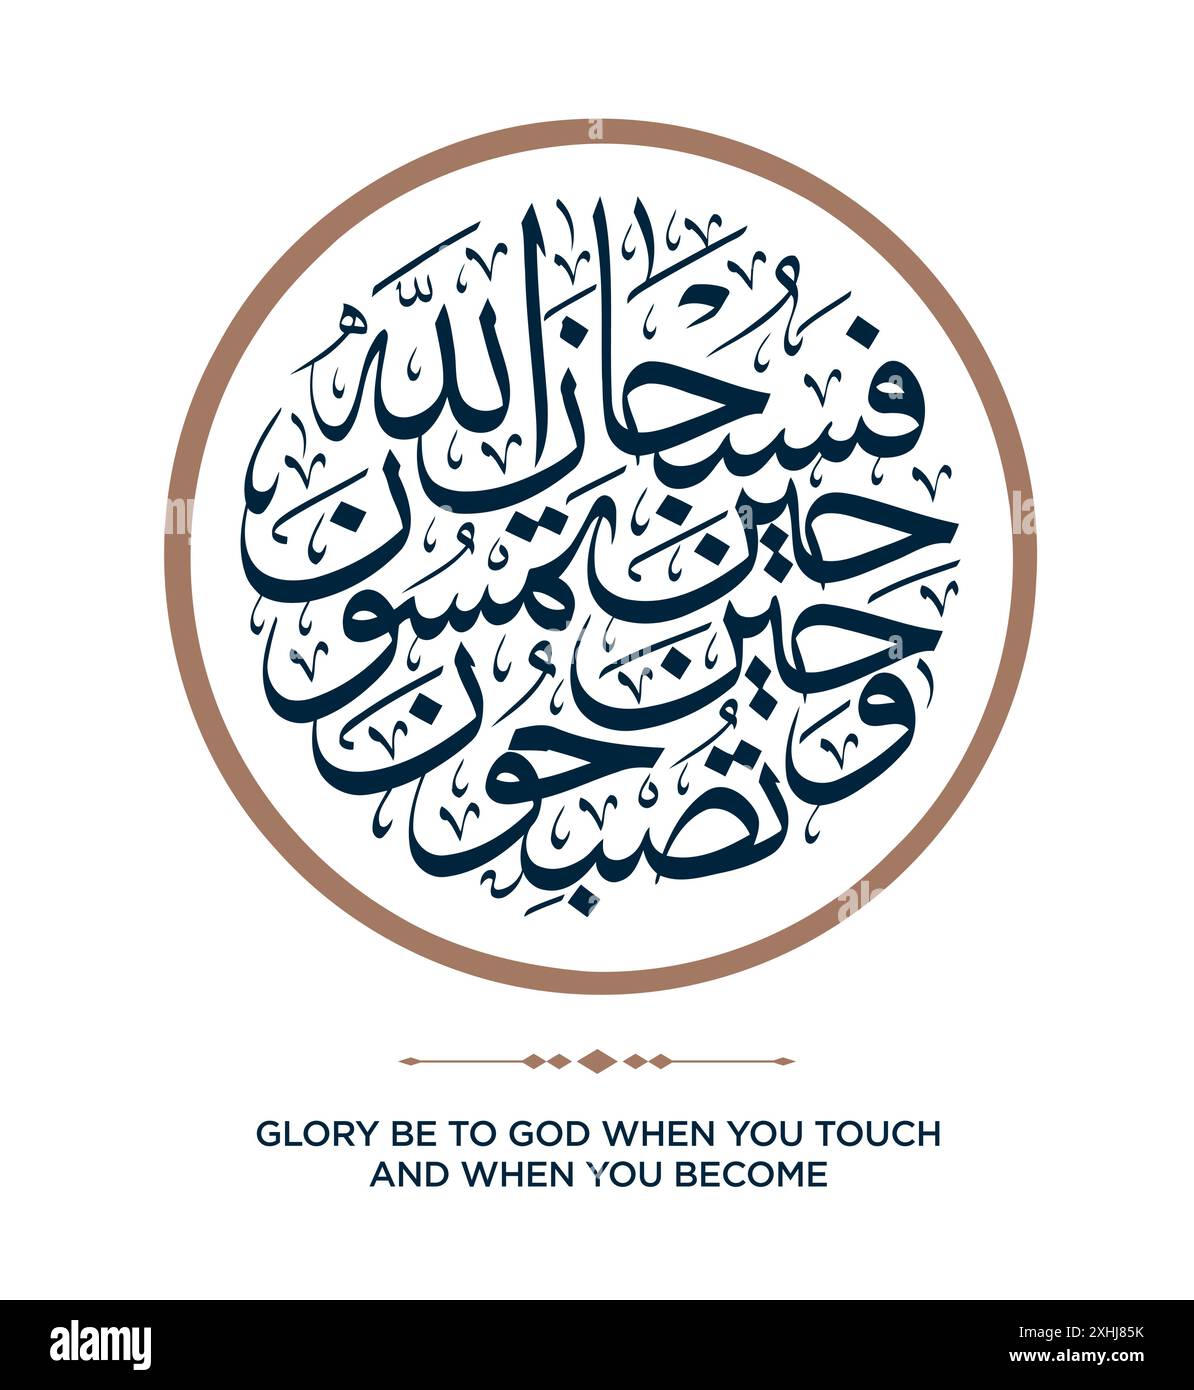 Verse from the Quran Translation: Glory be to God when you touch and when you become - سبحان الله عندما تمسون وعندما تصبحون. Stock Vector